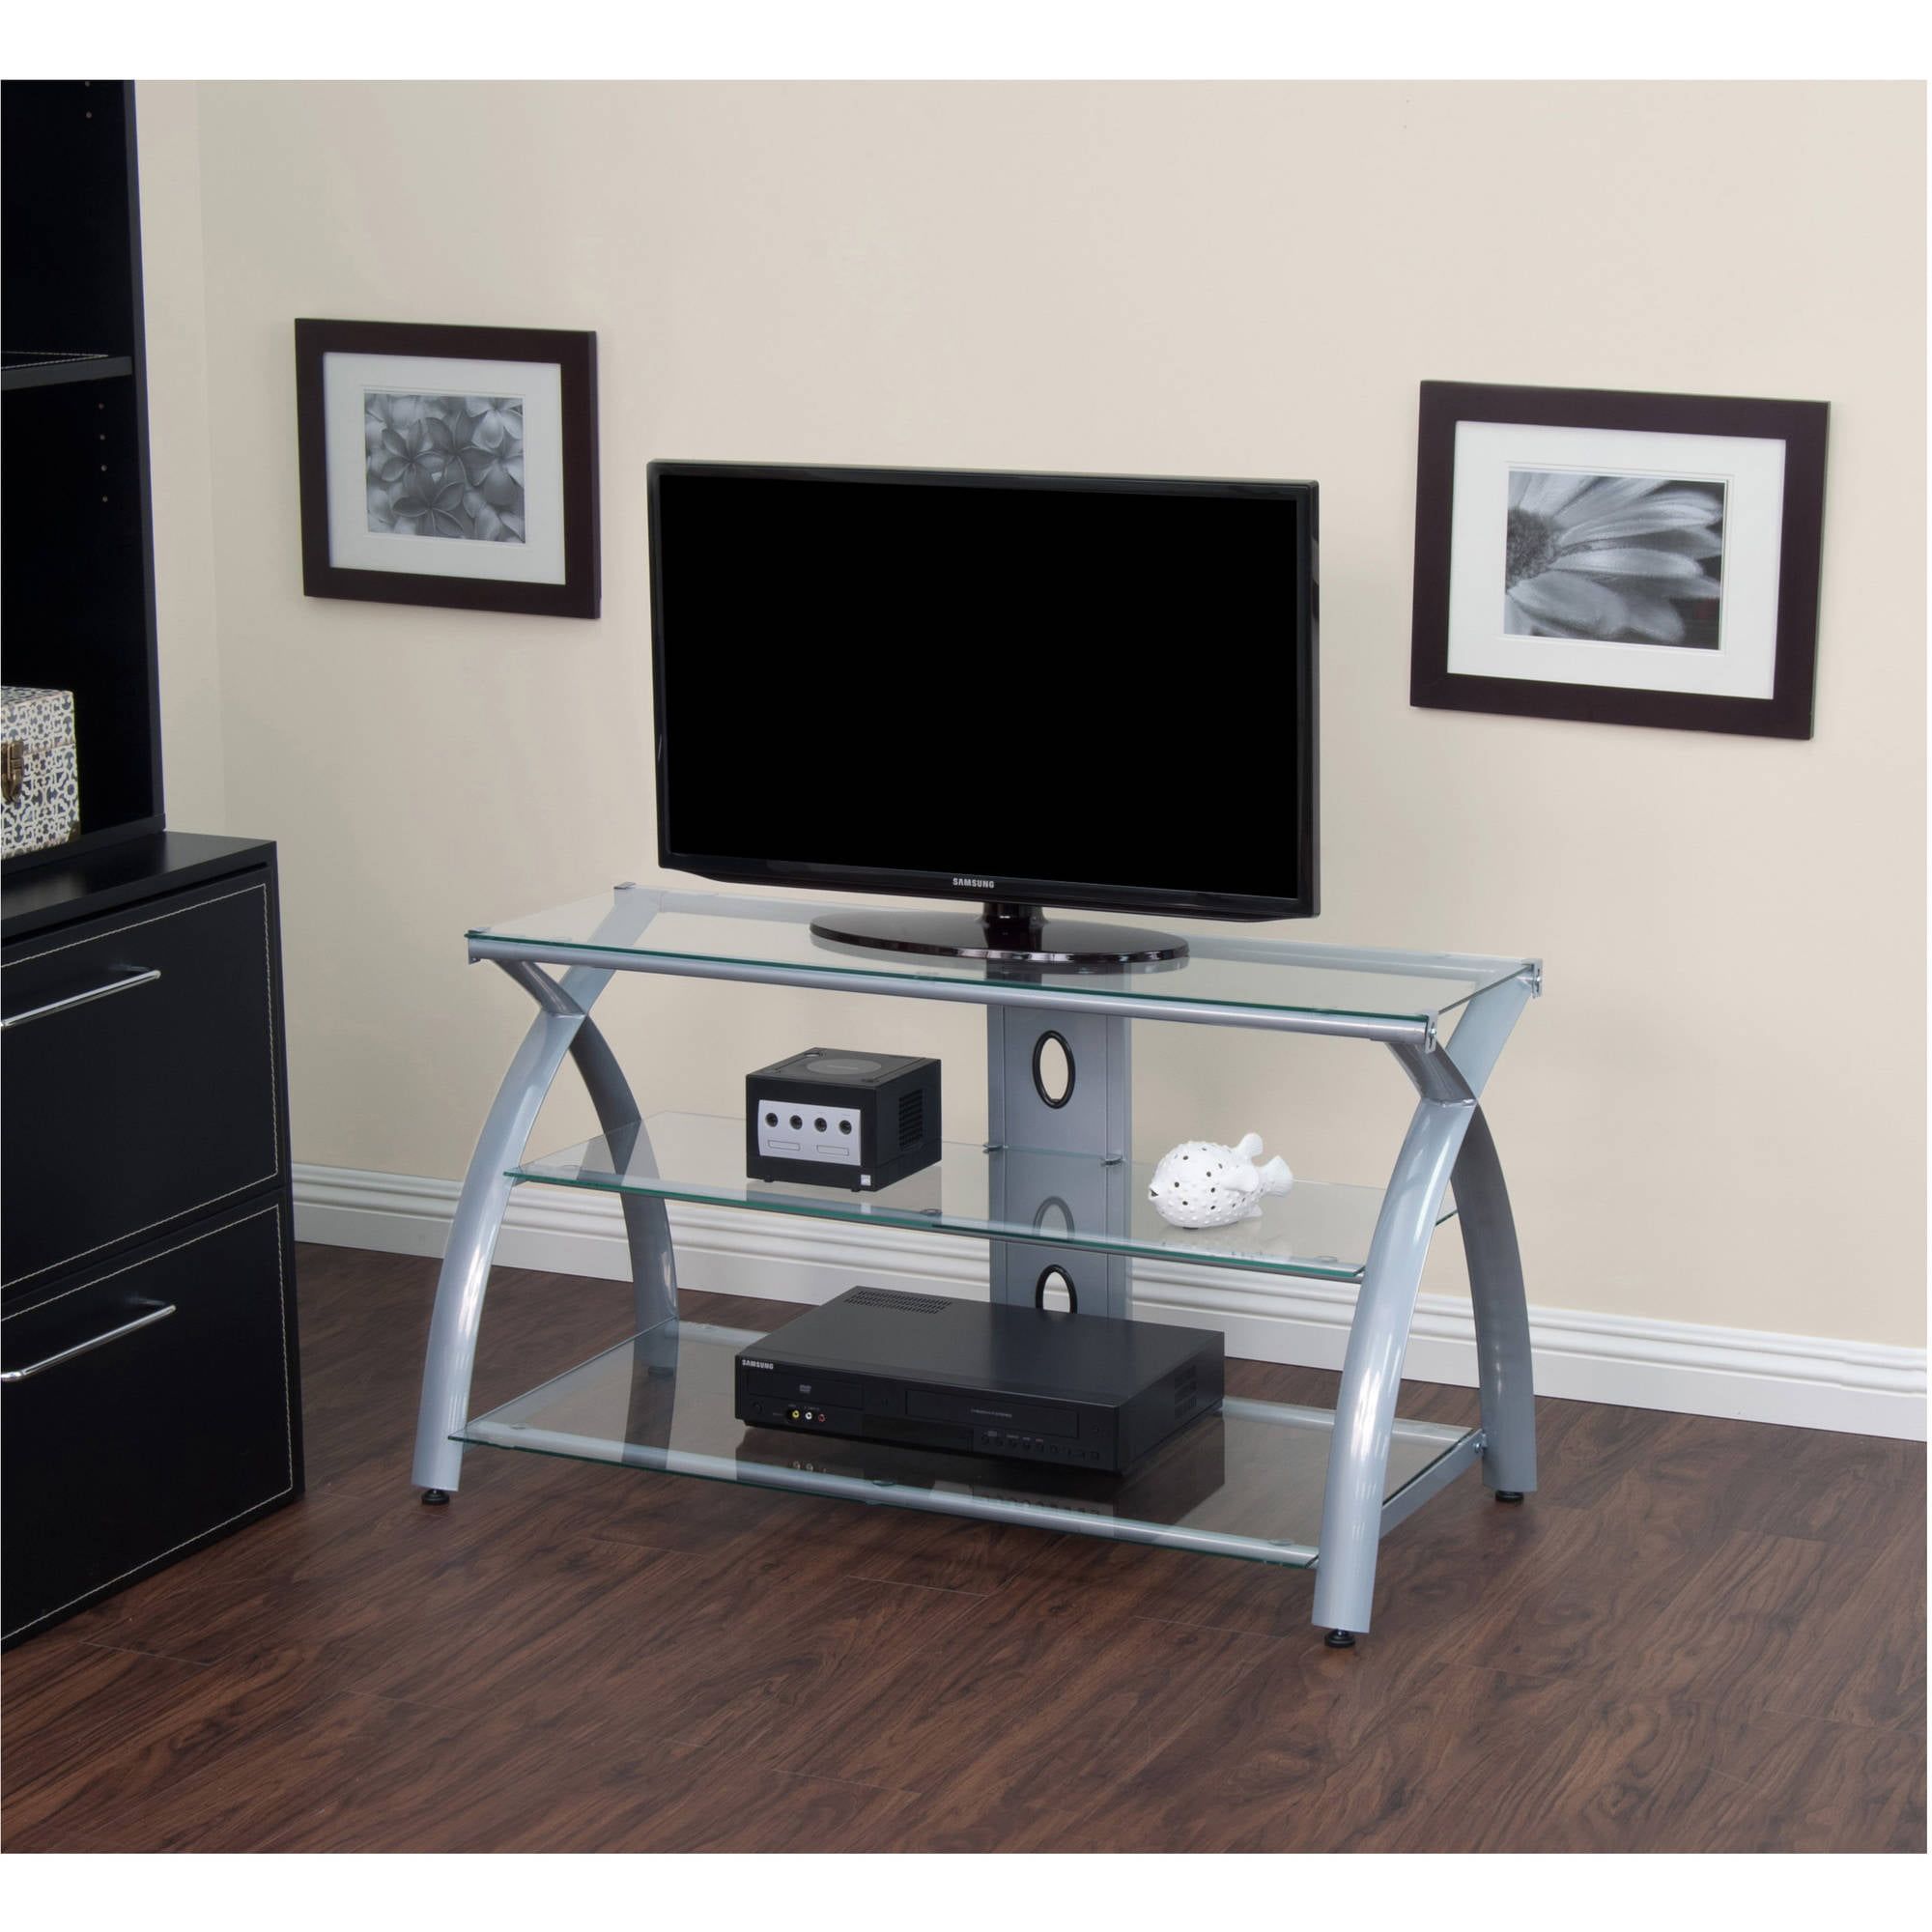 Calico Designs Futura 42" Wide 3 Shelf Tv Stand In Silver / Clear Glass Inside Glass Shelves Tv Stands (Gallery 9 of 20)